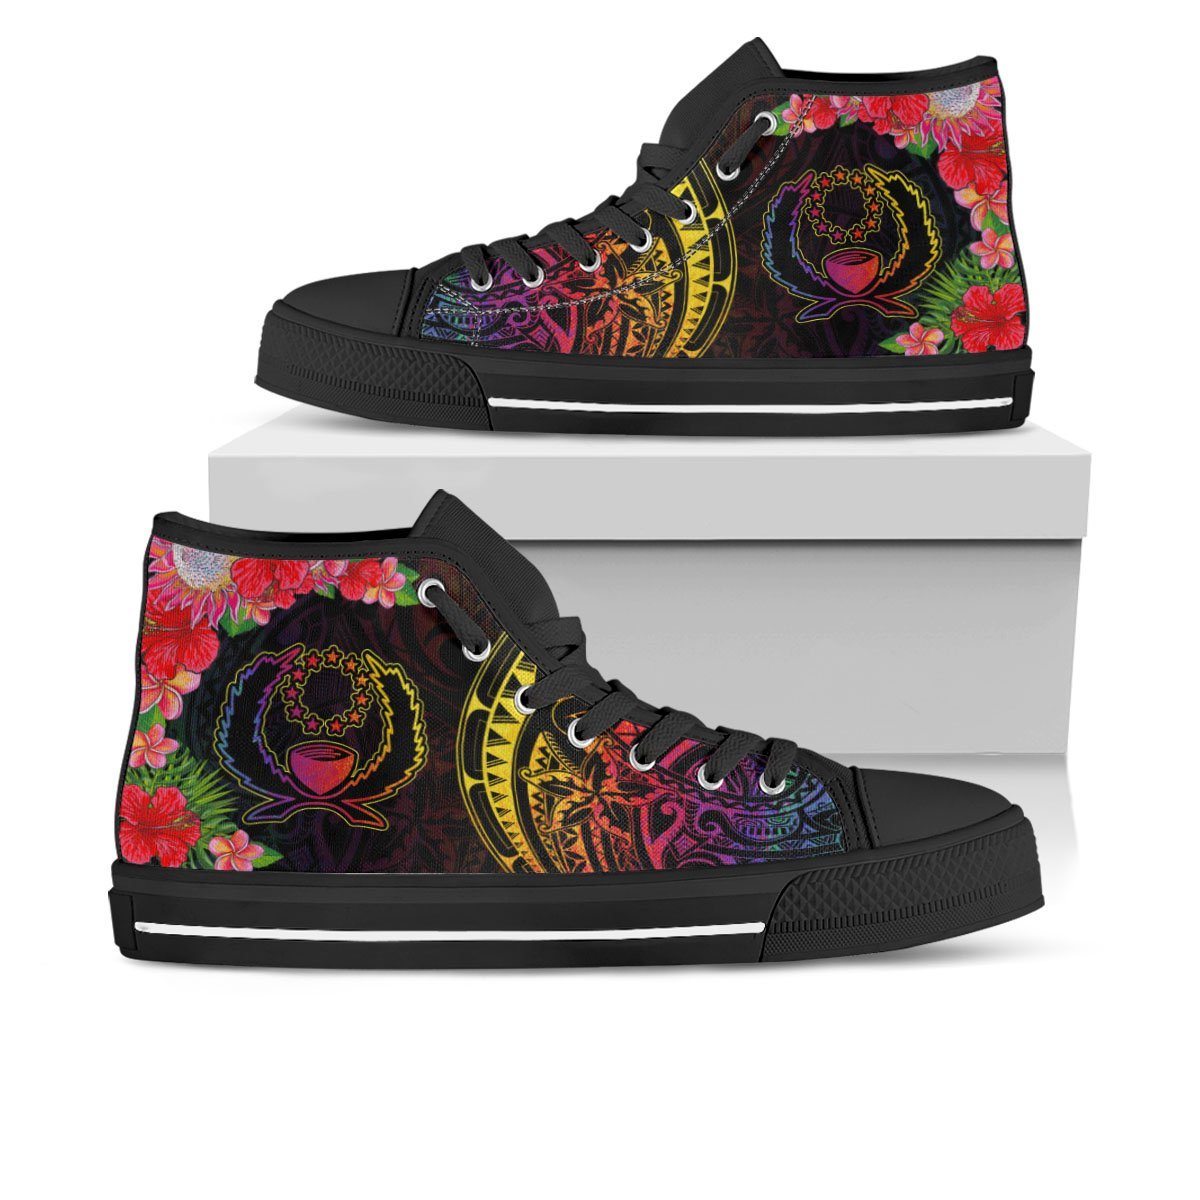 Pohnpei High Top Shoe - Tropical Hippie Style - BN01